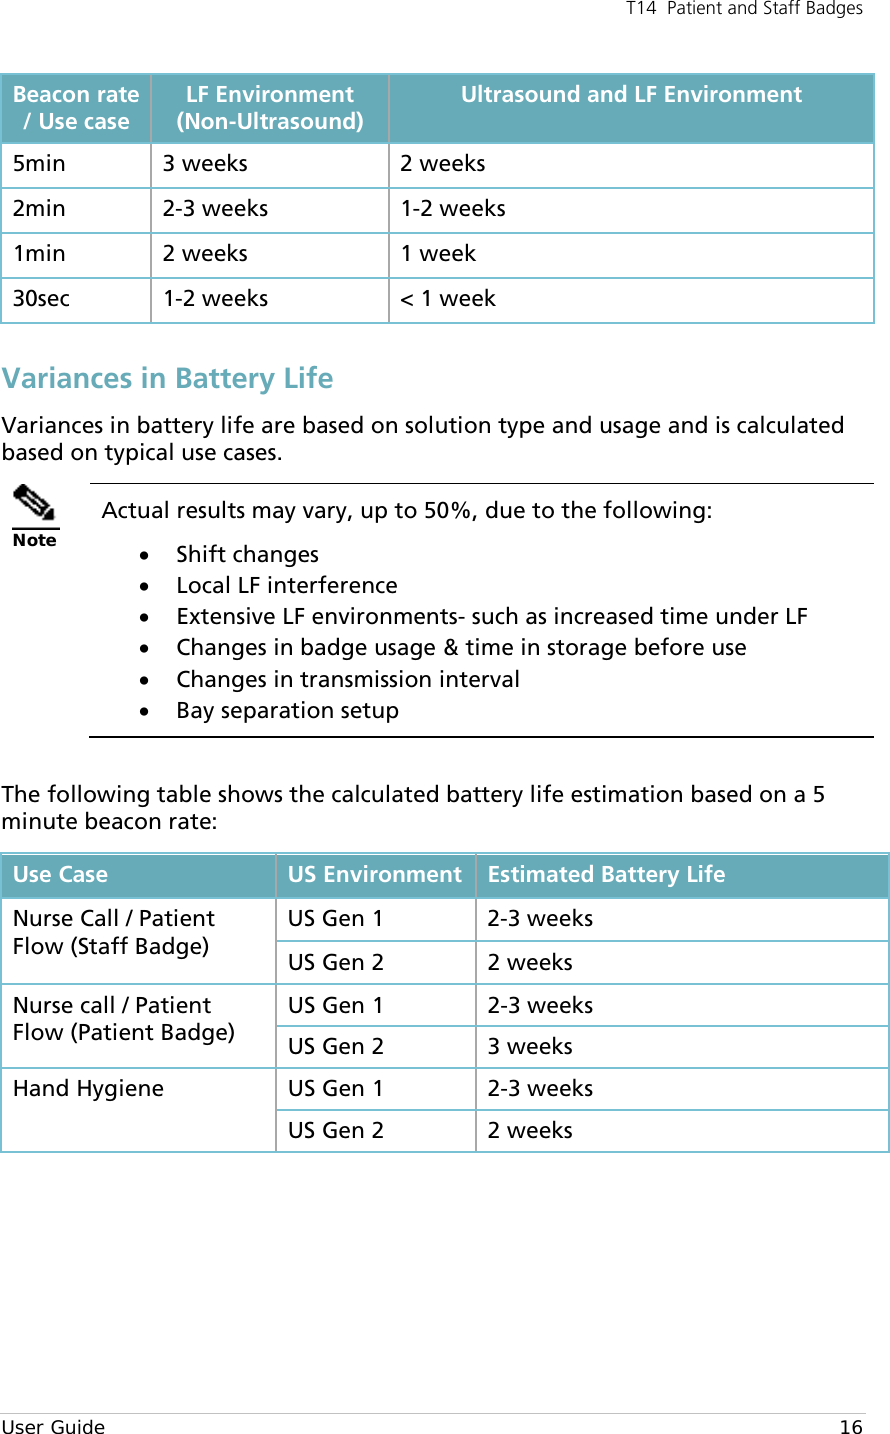 T14  Patient and Staff Badges  User Guide    16 Beacon rate / Use case LF Environment (Non-Ultrasound) Ultrasound and LF Environment 5min 3 weeks 2 weeks 2min  2-3 weeks  1-2 weeks 1min 2 weeks 1 week 30sec  1-2 weeks &lt; 1 week Variances in Battery Life Variances in battery life are based on solution type and usage and is calculated based on typical use cases.  Note Actual results may vary, up to 50%, due to the following: • Shift changes  • Local LF interference  • Extensive LF environments- such as increased time under LF • Changes in badge usage &amp; time in storage before use • Changes in transmission interval • Bay separation setup   The following table shows the calculated battery life estimation based on a 5 minute beacon rate: Use Case US Environment Estimated Battery Life  Nurse Call / Patient Flow (Staff Badge) US Gen 1  2-3 weeks US Gen 2 2 weeks  Nurse call / Patient Flow (Patient Badge) US Gen 1  2-3 weeks US Gen 2 3 weeks Hand Hygiene US Gen 1  2-3 weeks US Gen 2 2 weeks       